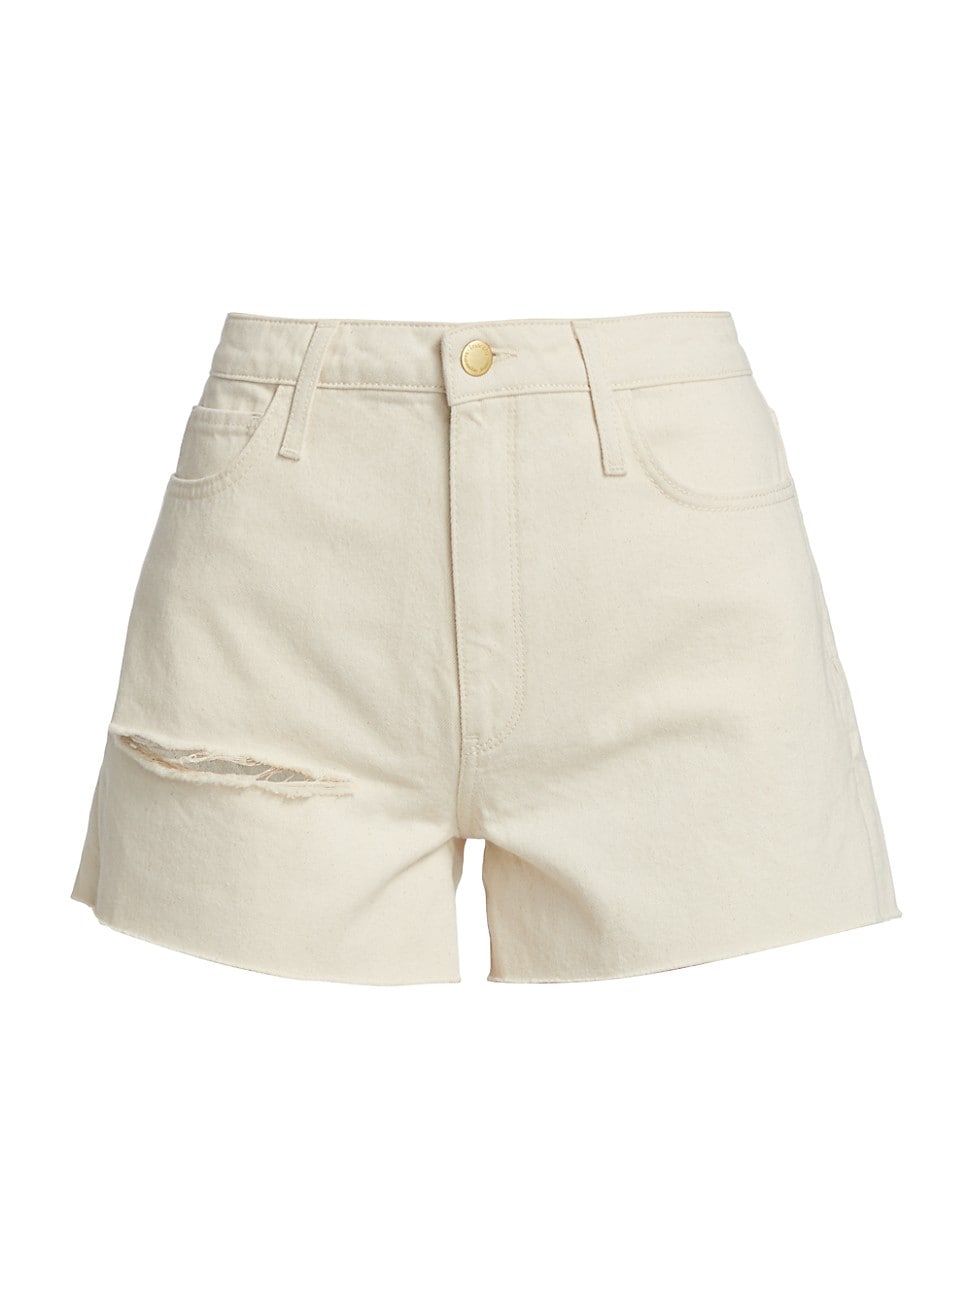 Women's Frayed Cotton Shorts - Off White - Size 31 | Saks Fifth Avenue